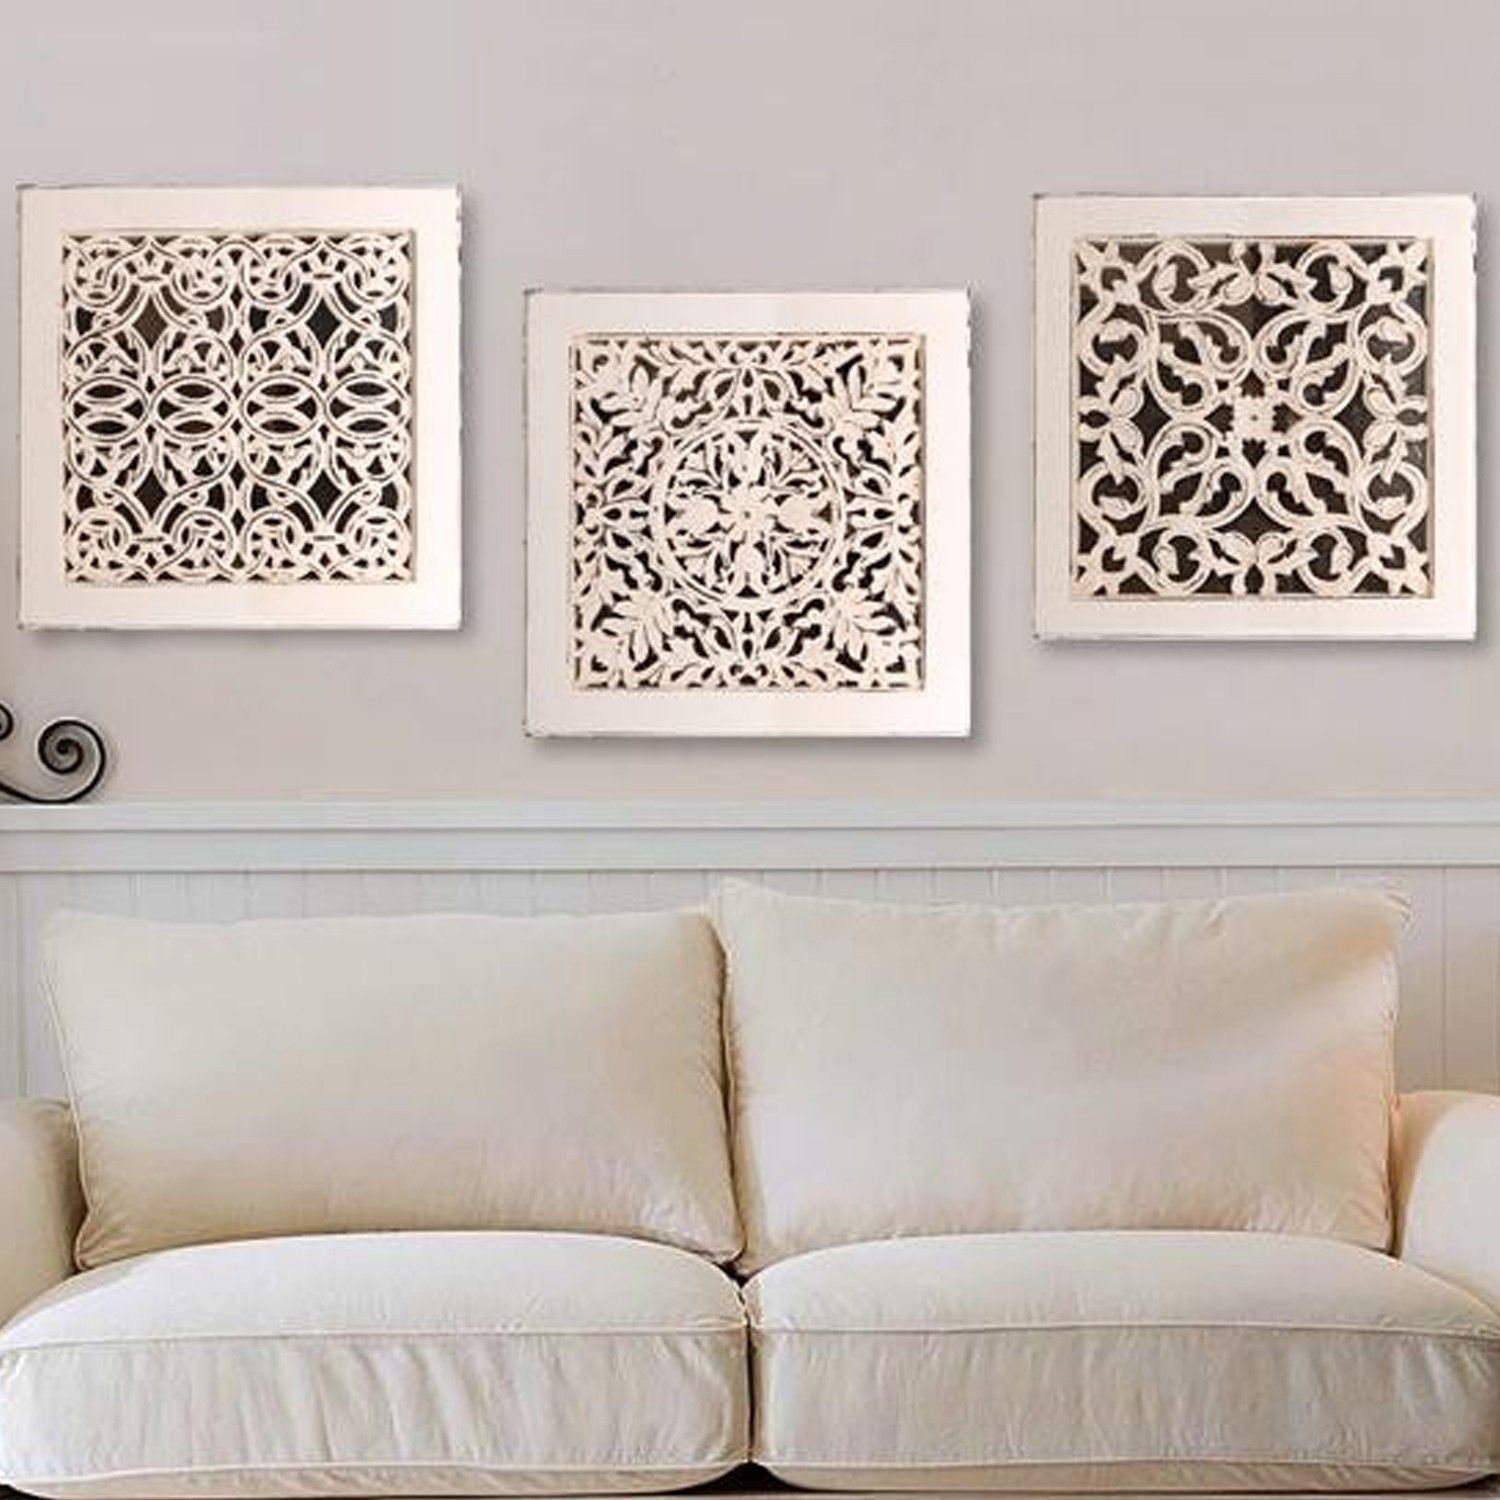 Fretwork Wall Art: White (set Of 3) | The Yellow Door Store Intended For White Wall Art (View 15 of 20)